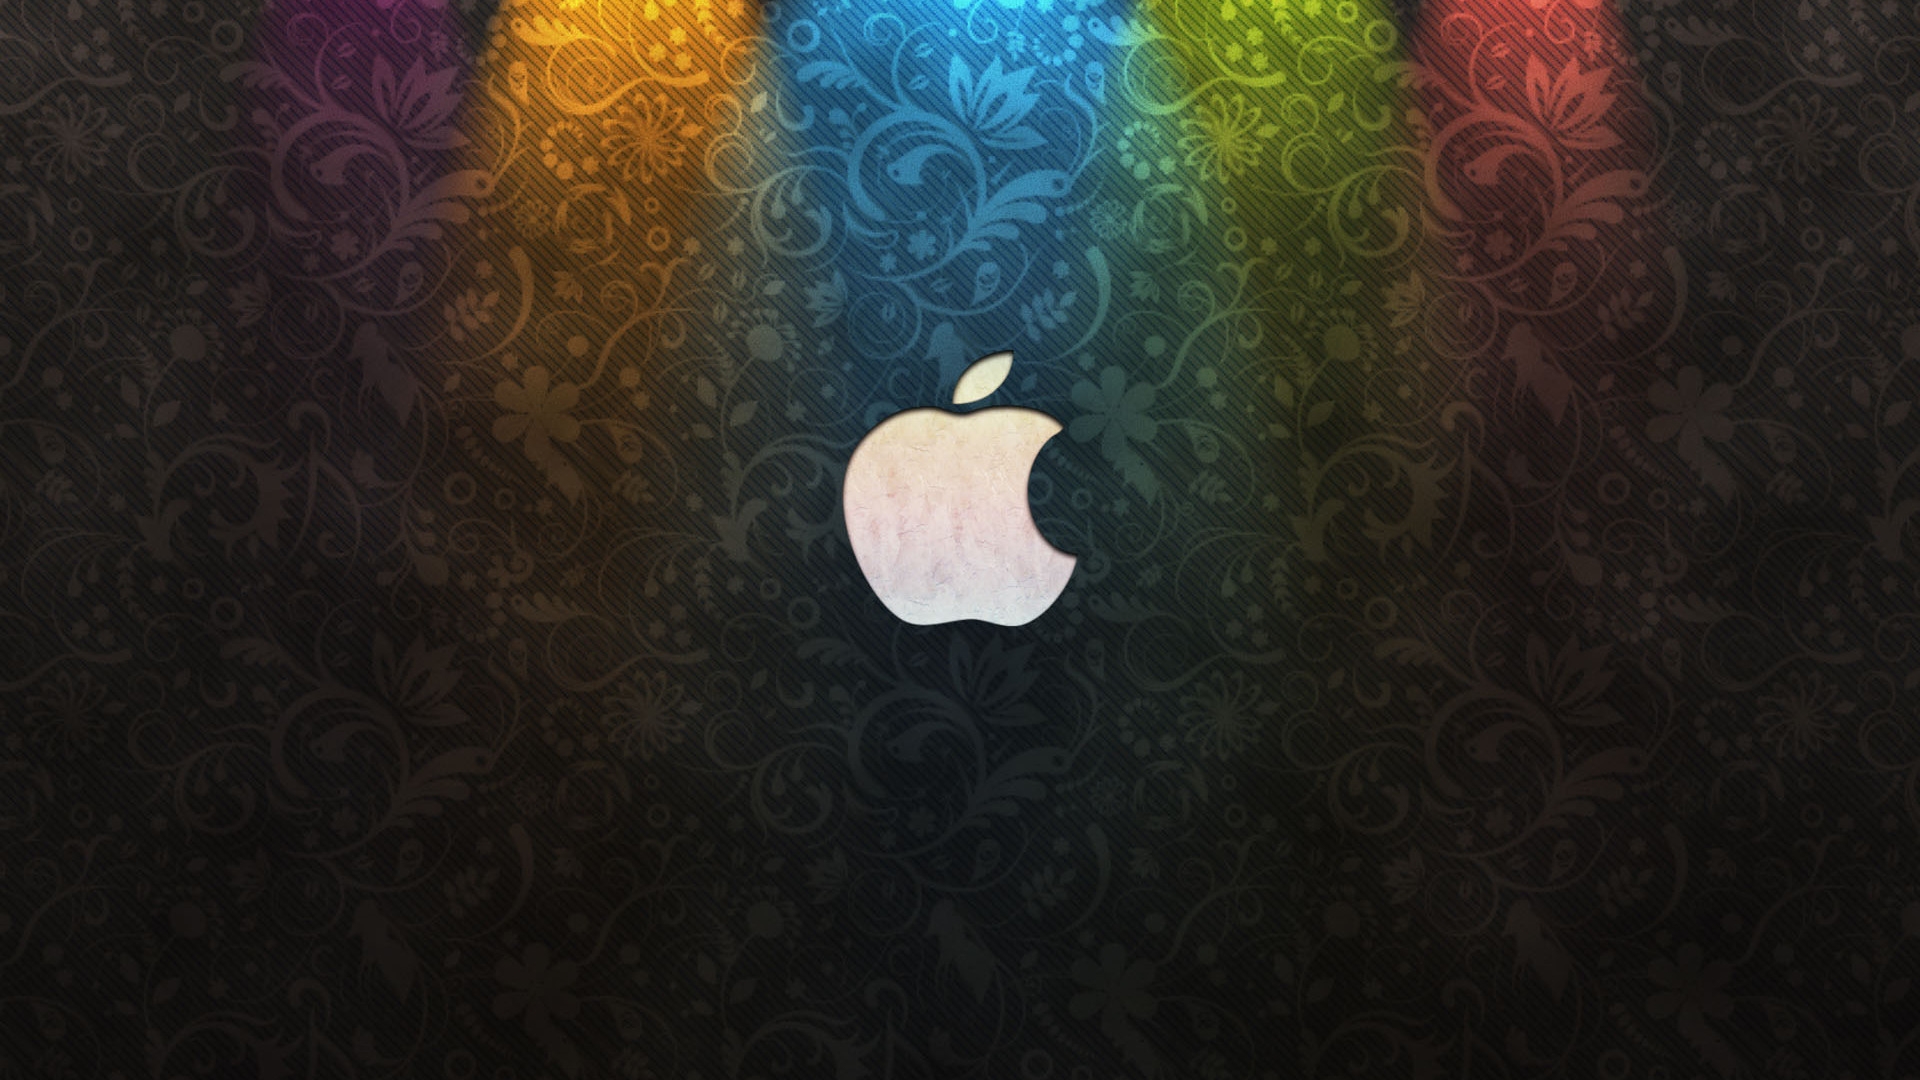 Apple Logo and Flower Background for 1920 x 1080 HDTV 1080p resolution